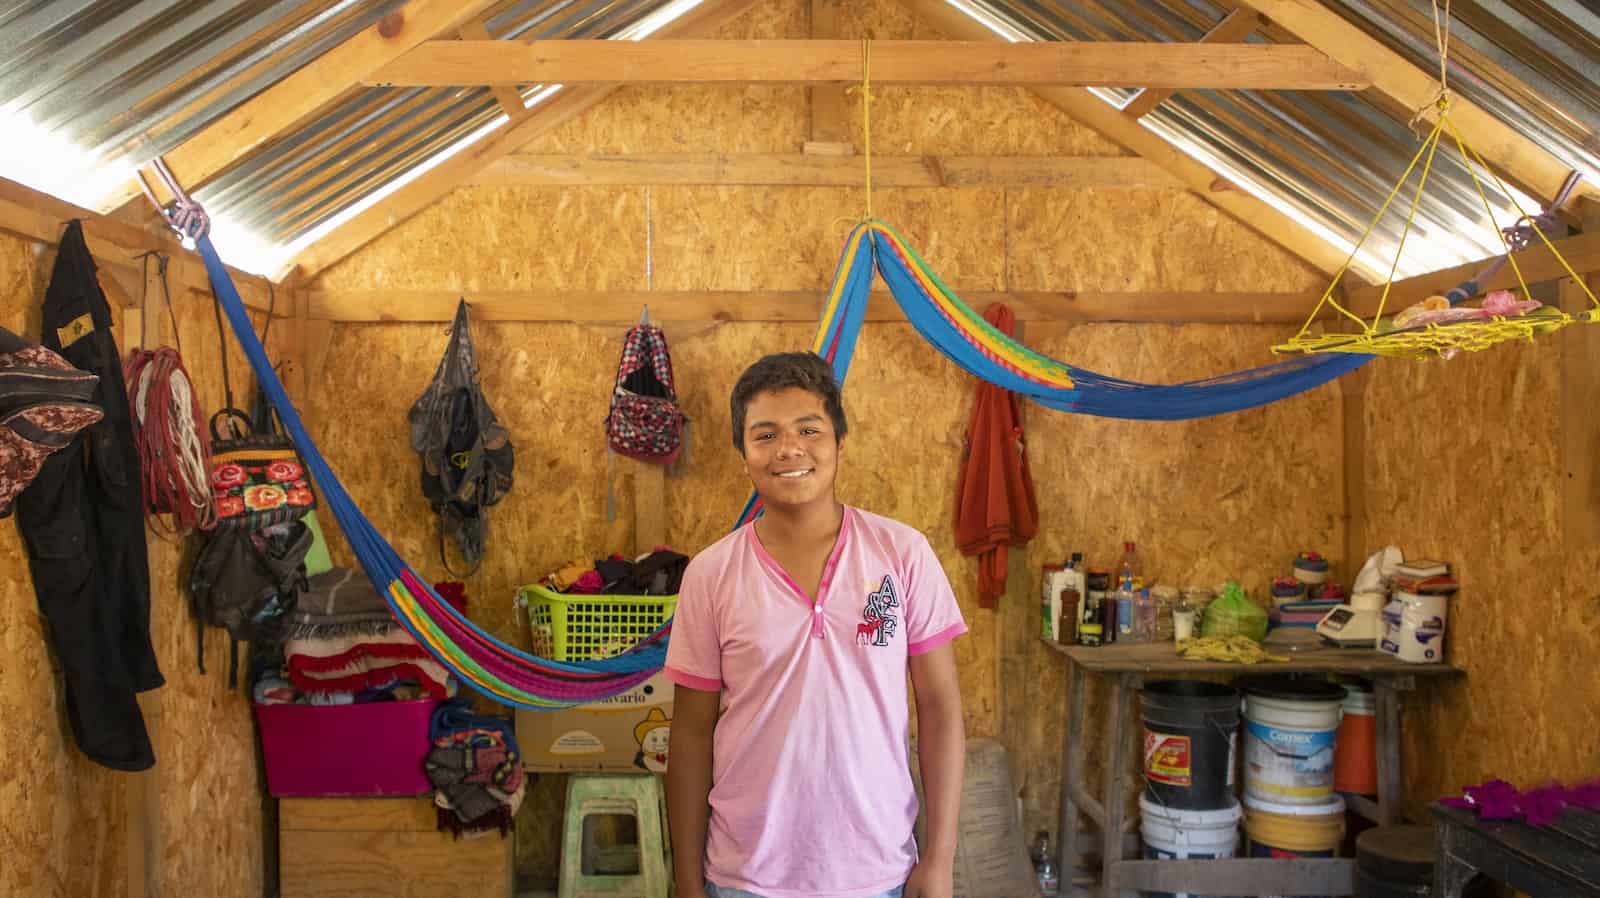 A boy in a pink shirt and jean short stands in the interior of a home built from plywood and metal sheets. Colorful hammocks hang from the ceiling, and personal items, like backpacks hang on the walls. There is a small table in one corner.